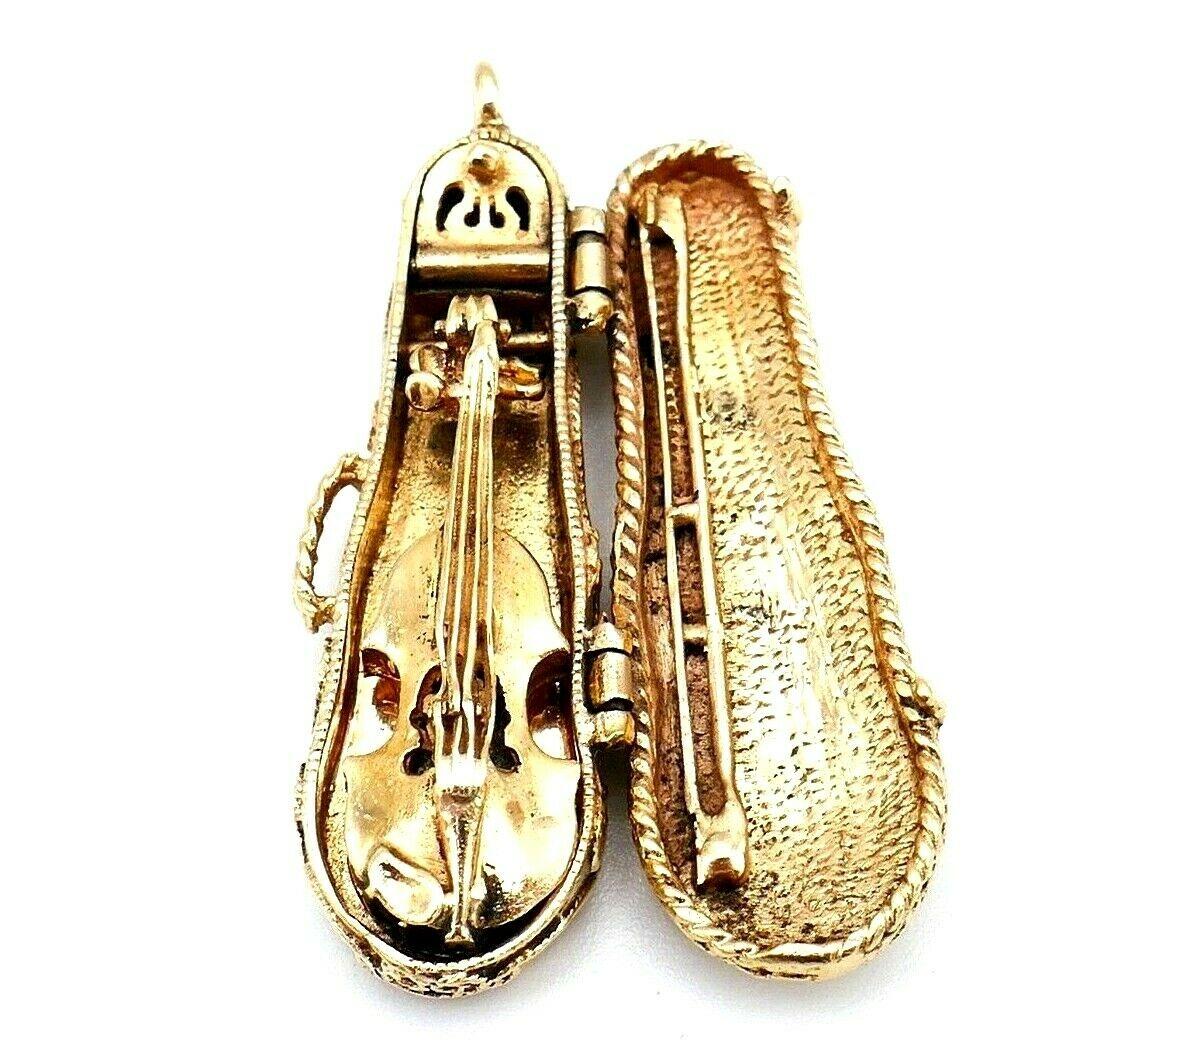 Adorable antique 14k yellow gold violin charm featuring turquoise and Peking glass beads. The violin is attached inside the case, it's mechanical (see the pics). 
The case's details are incredible: it has latches, a handle, a pocket for 